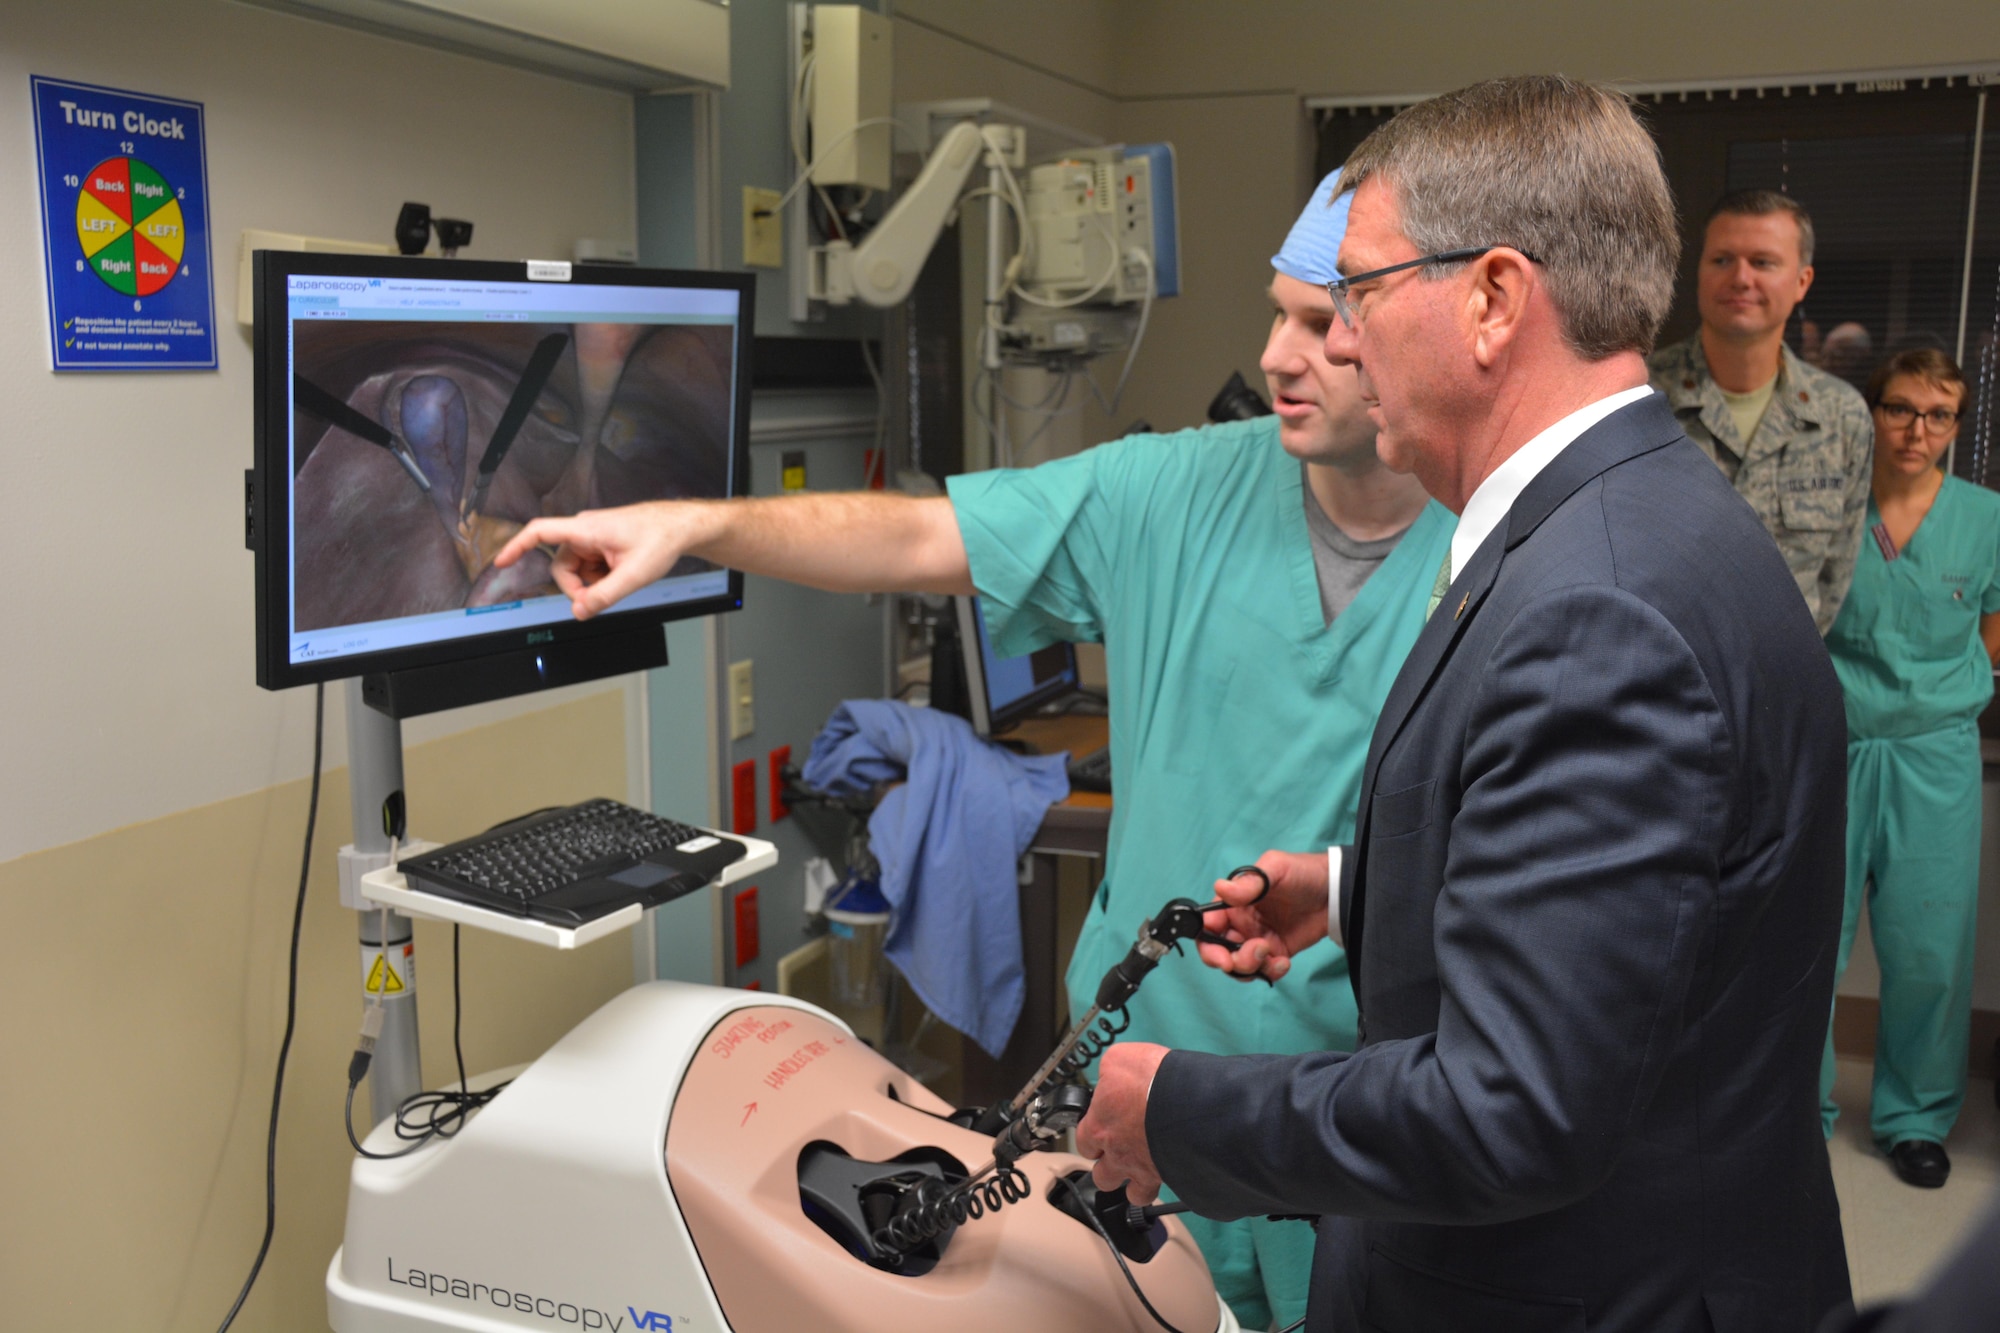 Secretary of Defense Ash Carter steadies his hand using the Laparoscopy simulator under the trained eyes of U.S. Army Maj. John Ritchie during his November 16 visit to Brooke Army Medical Center, Fort Sam Houston, Texas. BAMC is the Army’s largest and busiest medical center. Secretary Carter personally thanked wounded and ill warriors, their families and BAMC staff for their service and sacrifice. Secretary Carter toured labs and simulation centers pioneering new advances in diagnostic imaging and new medical training aids. His visit at BAMC was part of a tour of Joint Base San Antonio, with stops at JBSA-Lackland and JBSA-Randolph. (U.S. Army photo by Robert Shields/Released)